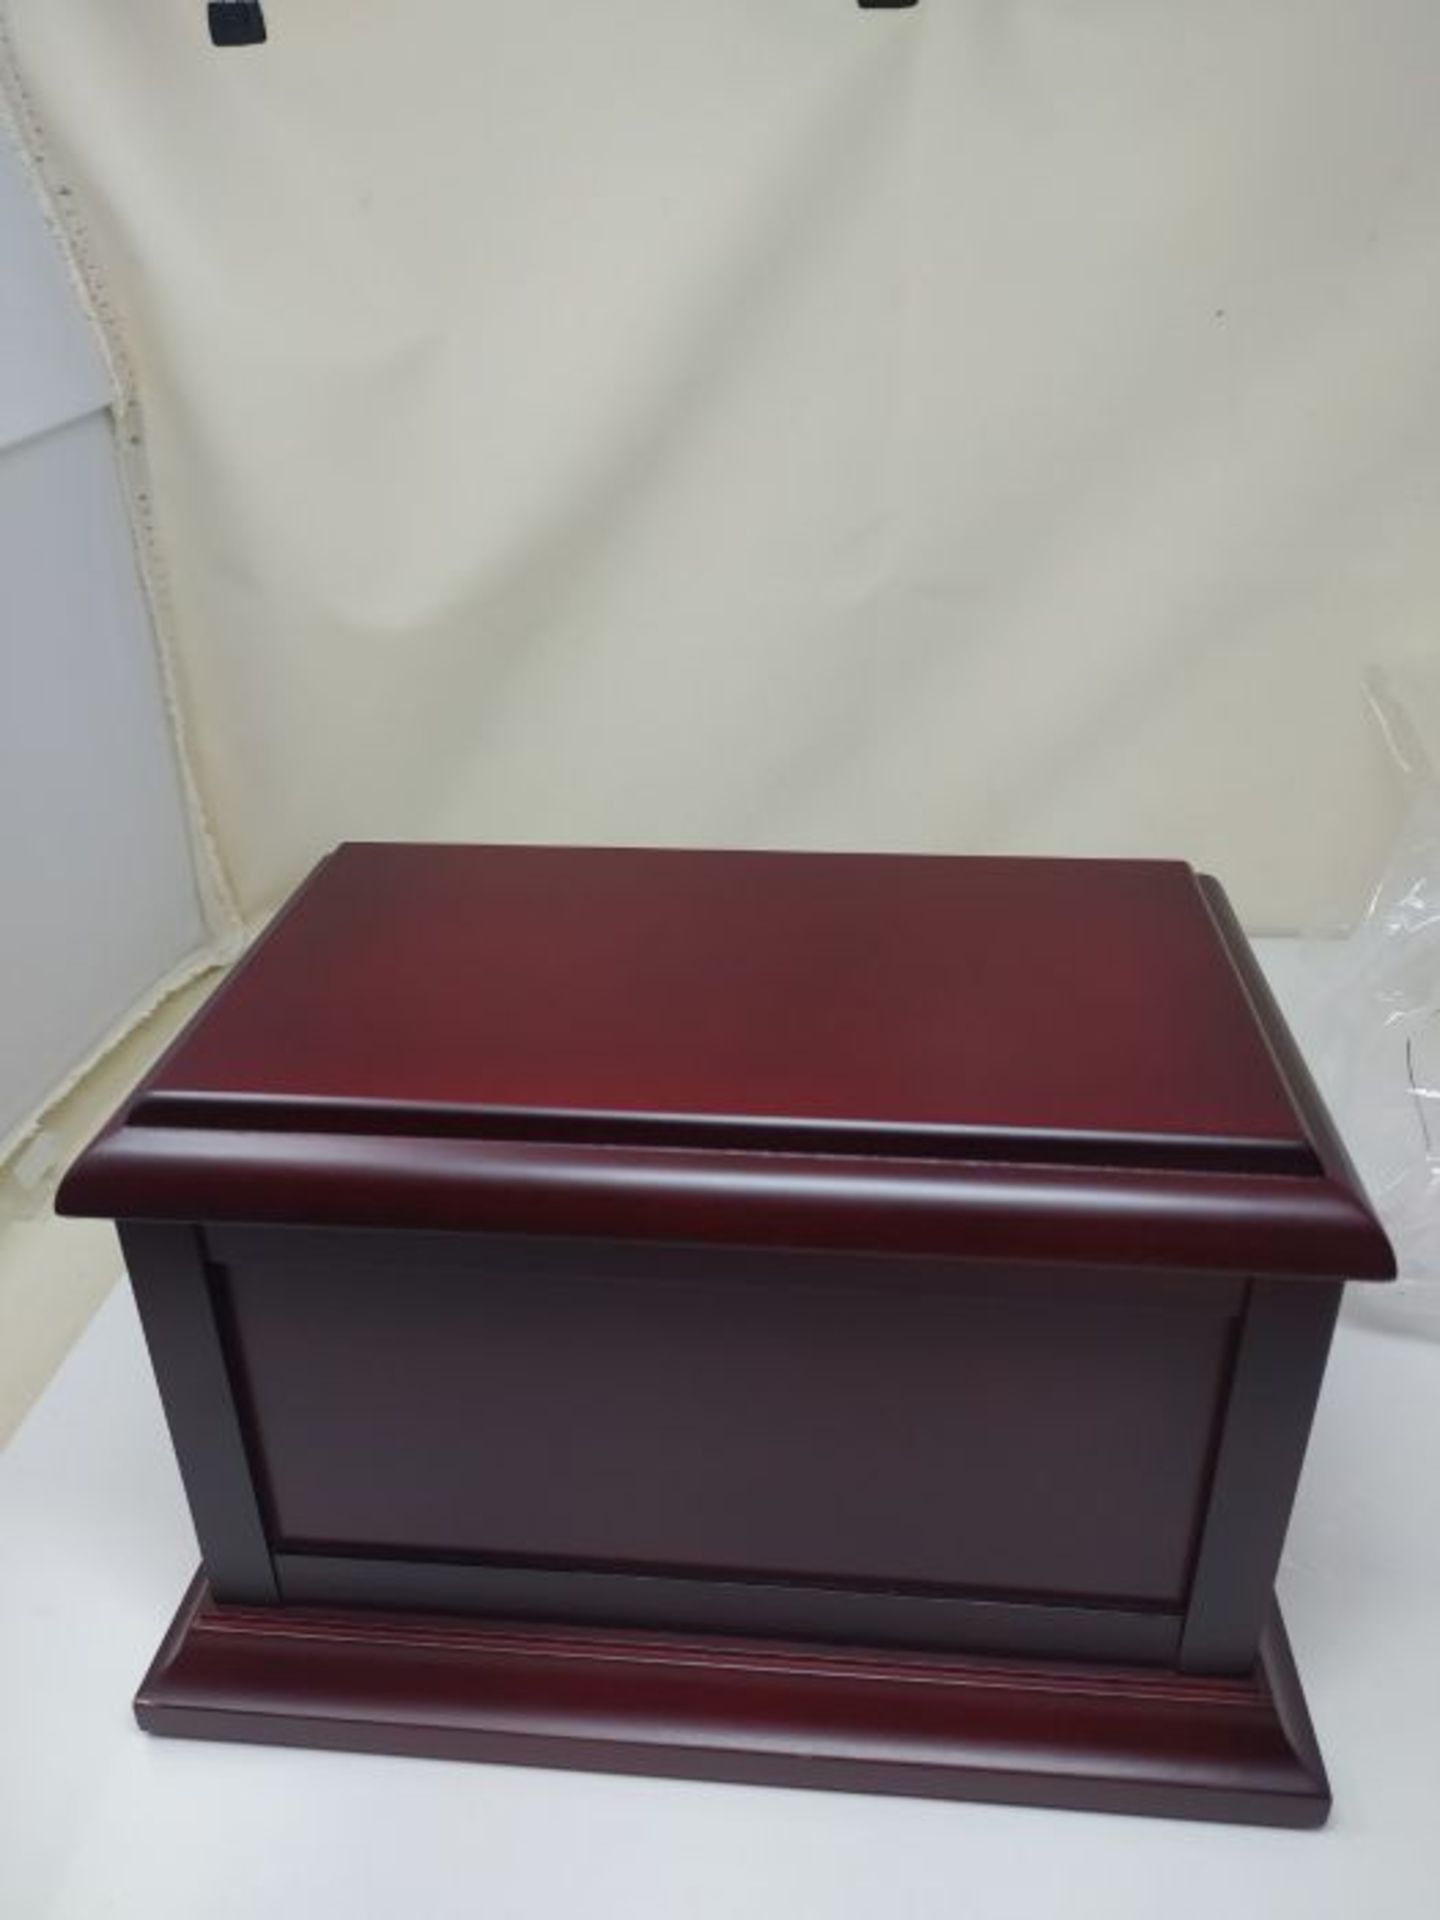 HC Memorials Hand-Carved Rosewood Crematory Urn For Adult Cremation Ashes - Image 2 of 2